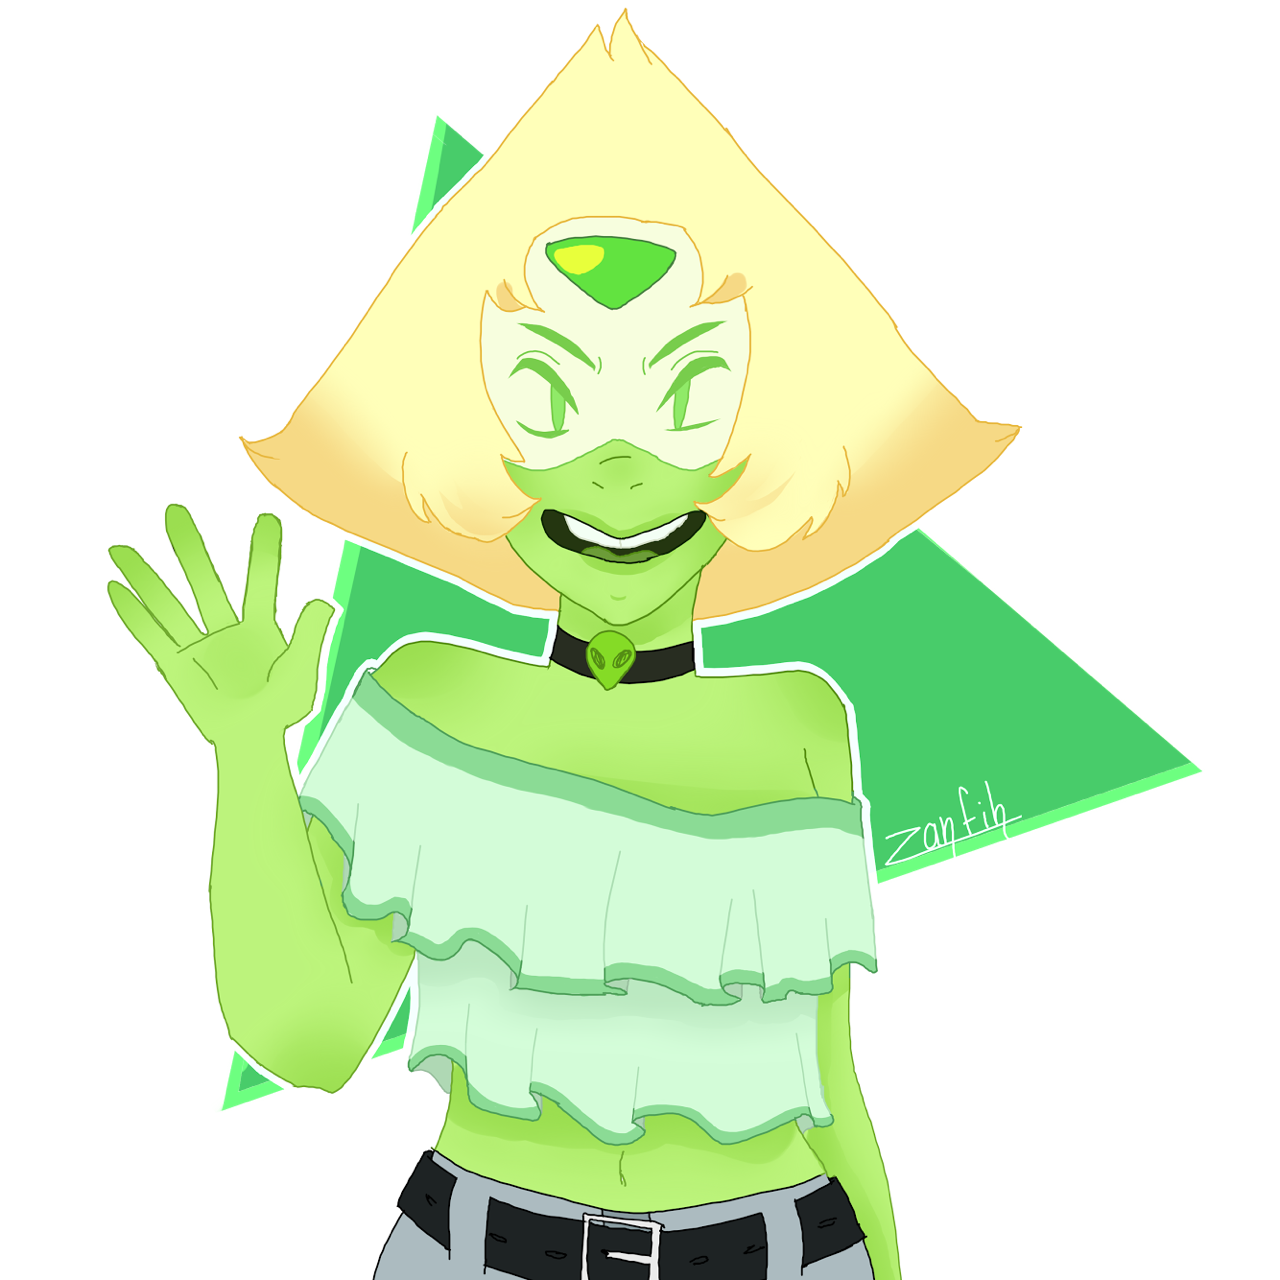 An old peridot drawing i did a few months ago✨ I’m planning on redrawing it soon!🌷